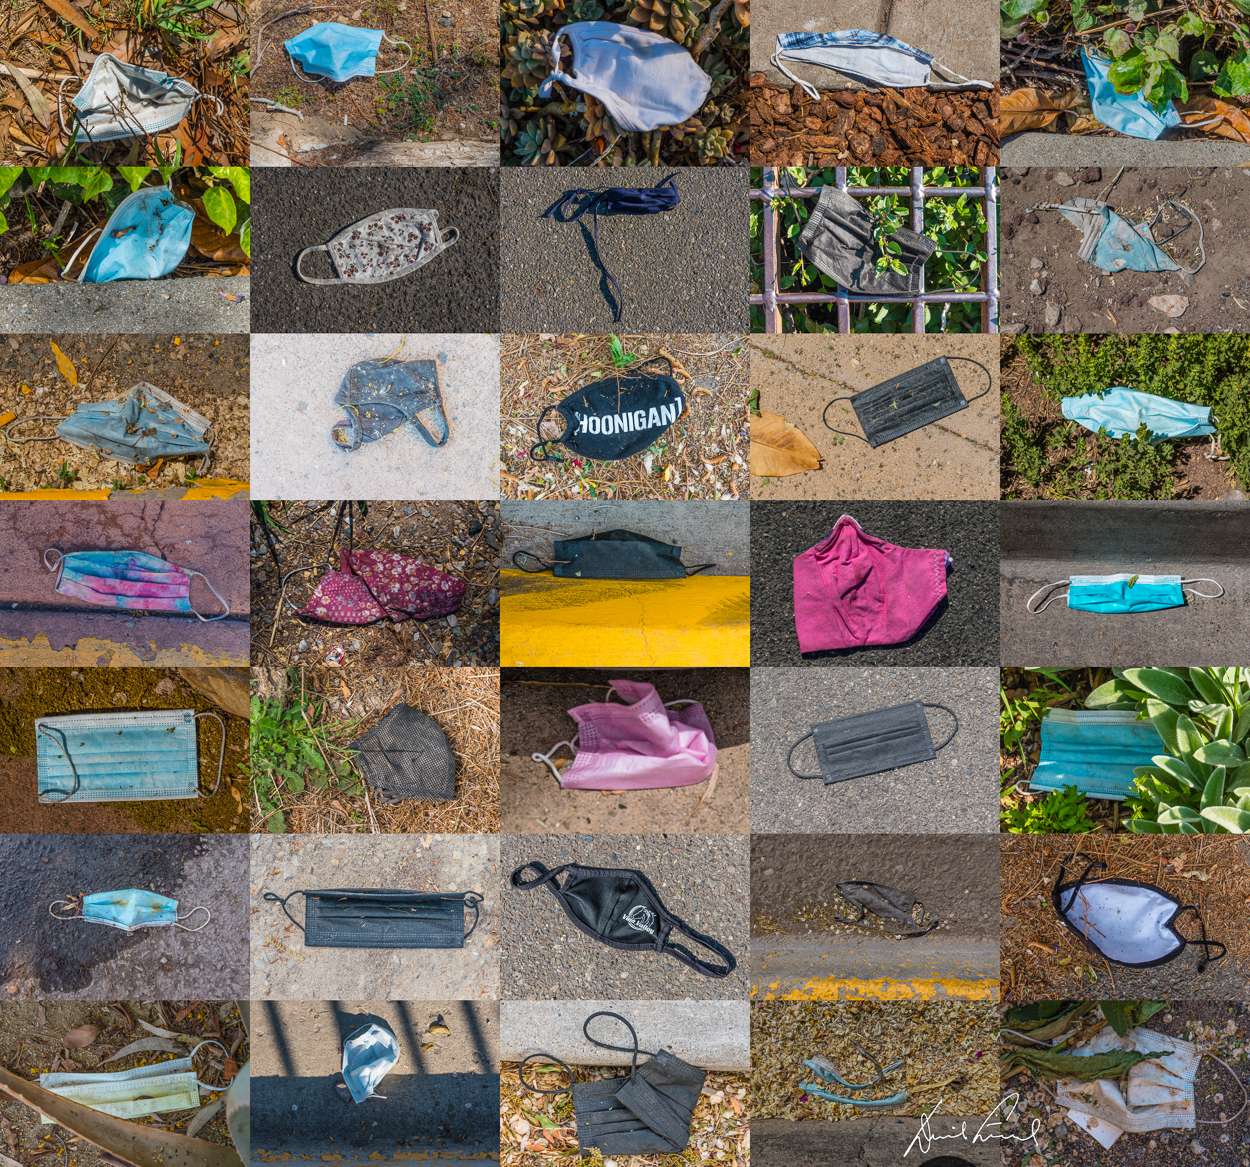 A collage of discarded face masks found tossed on the ground during the COVID-19 pandemic. This image is a part of the COVID-19 Project.